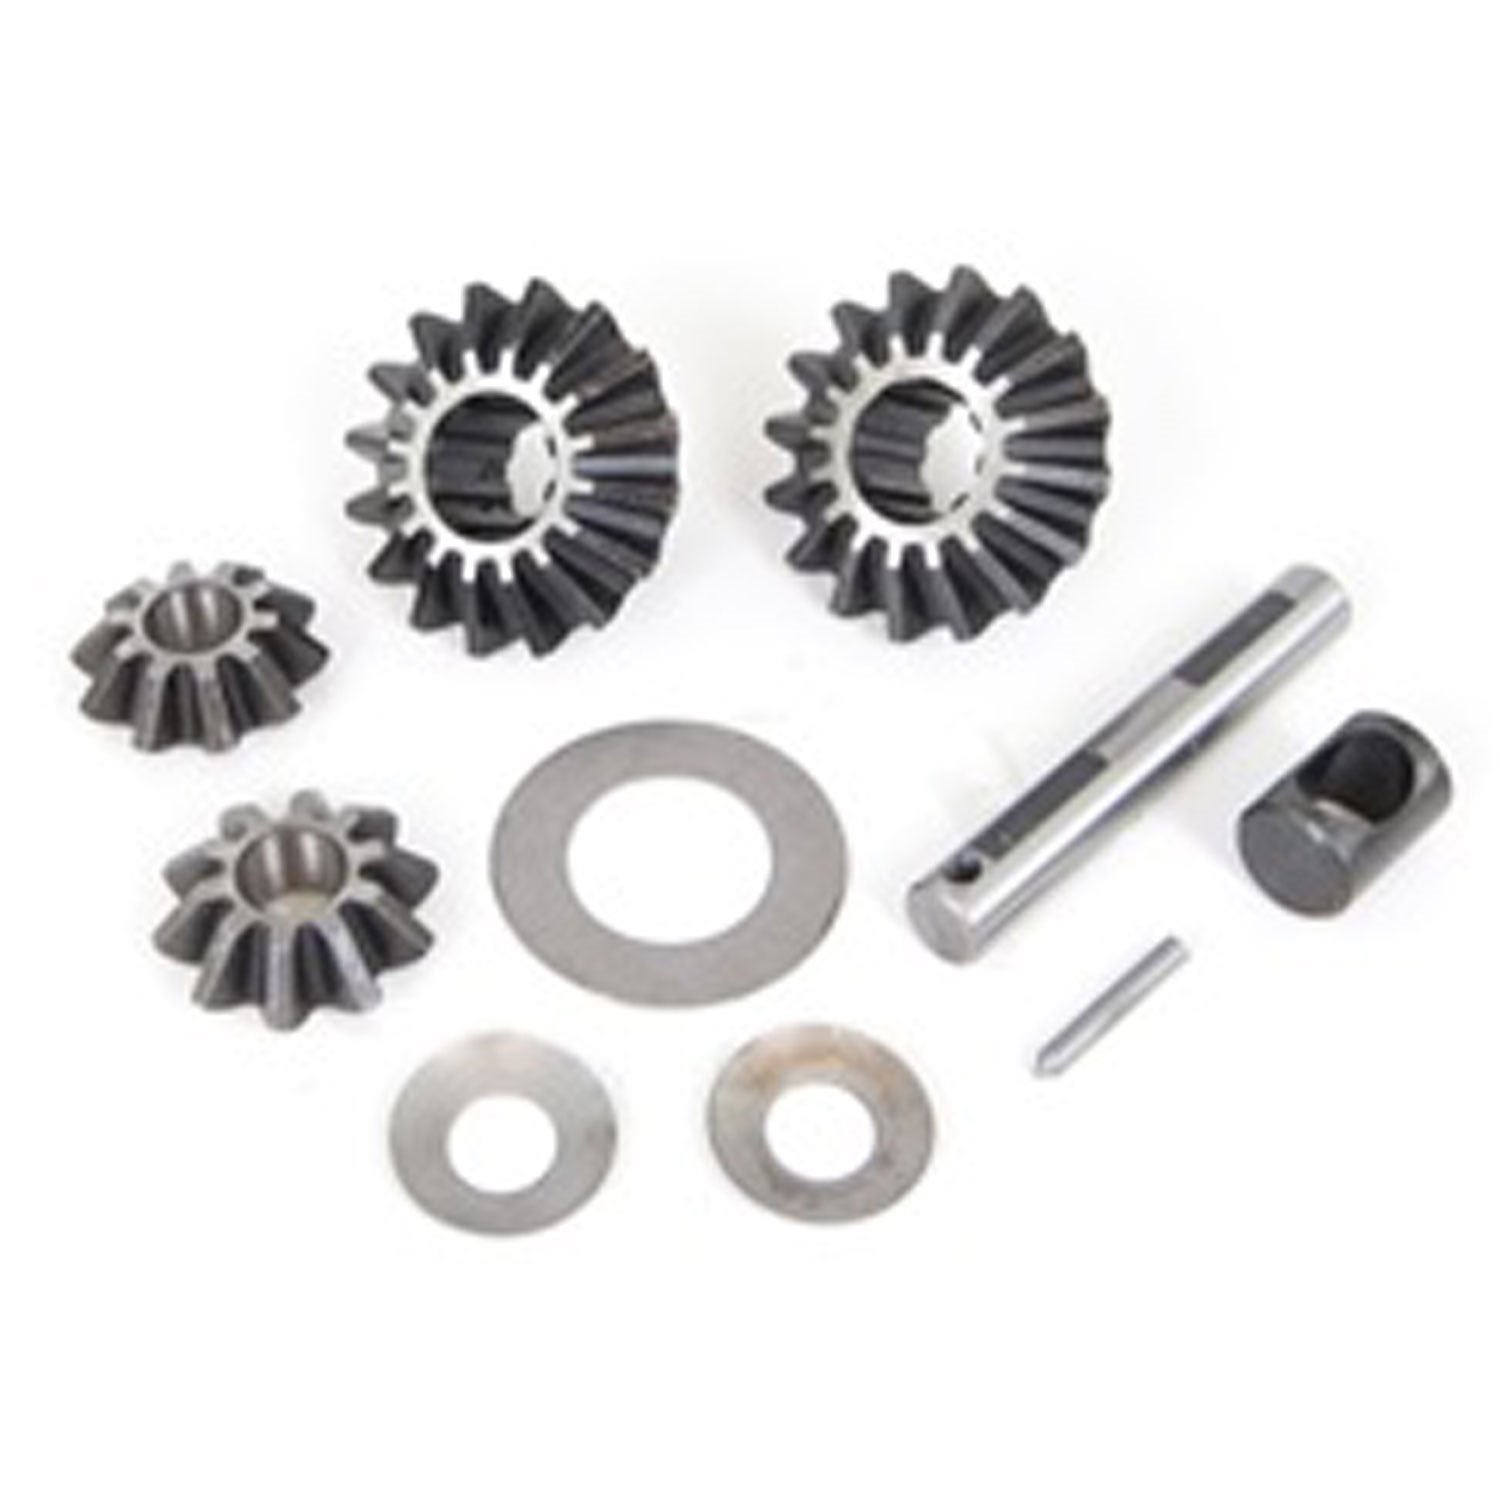 This rear Dana 44 spider gear kit fits the 10-spline tapered axle shafts used in 49-53 Willys CJ-3As